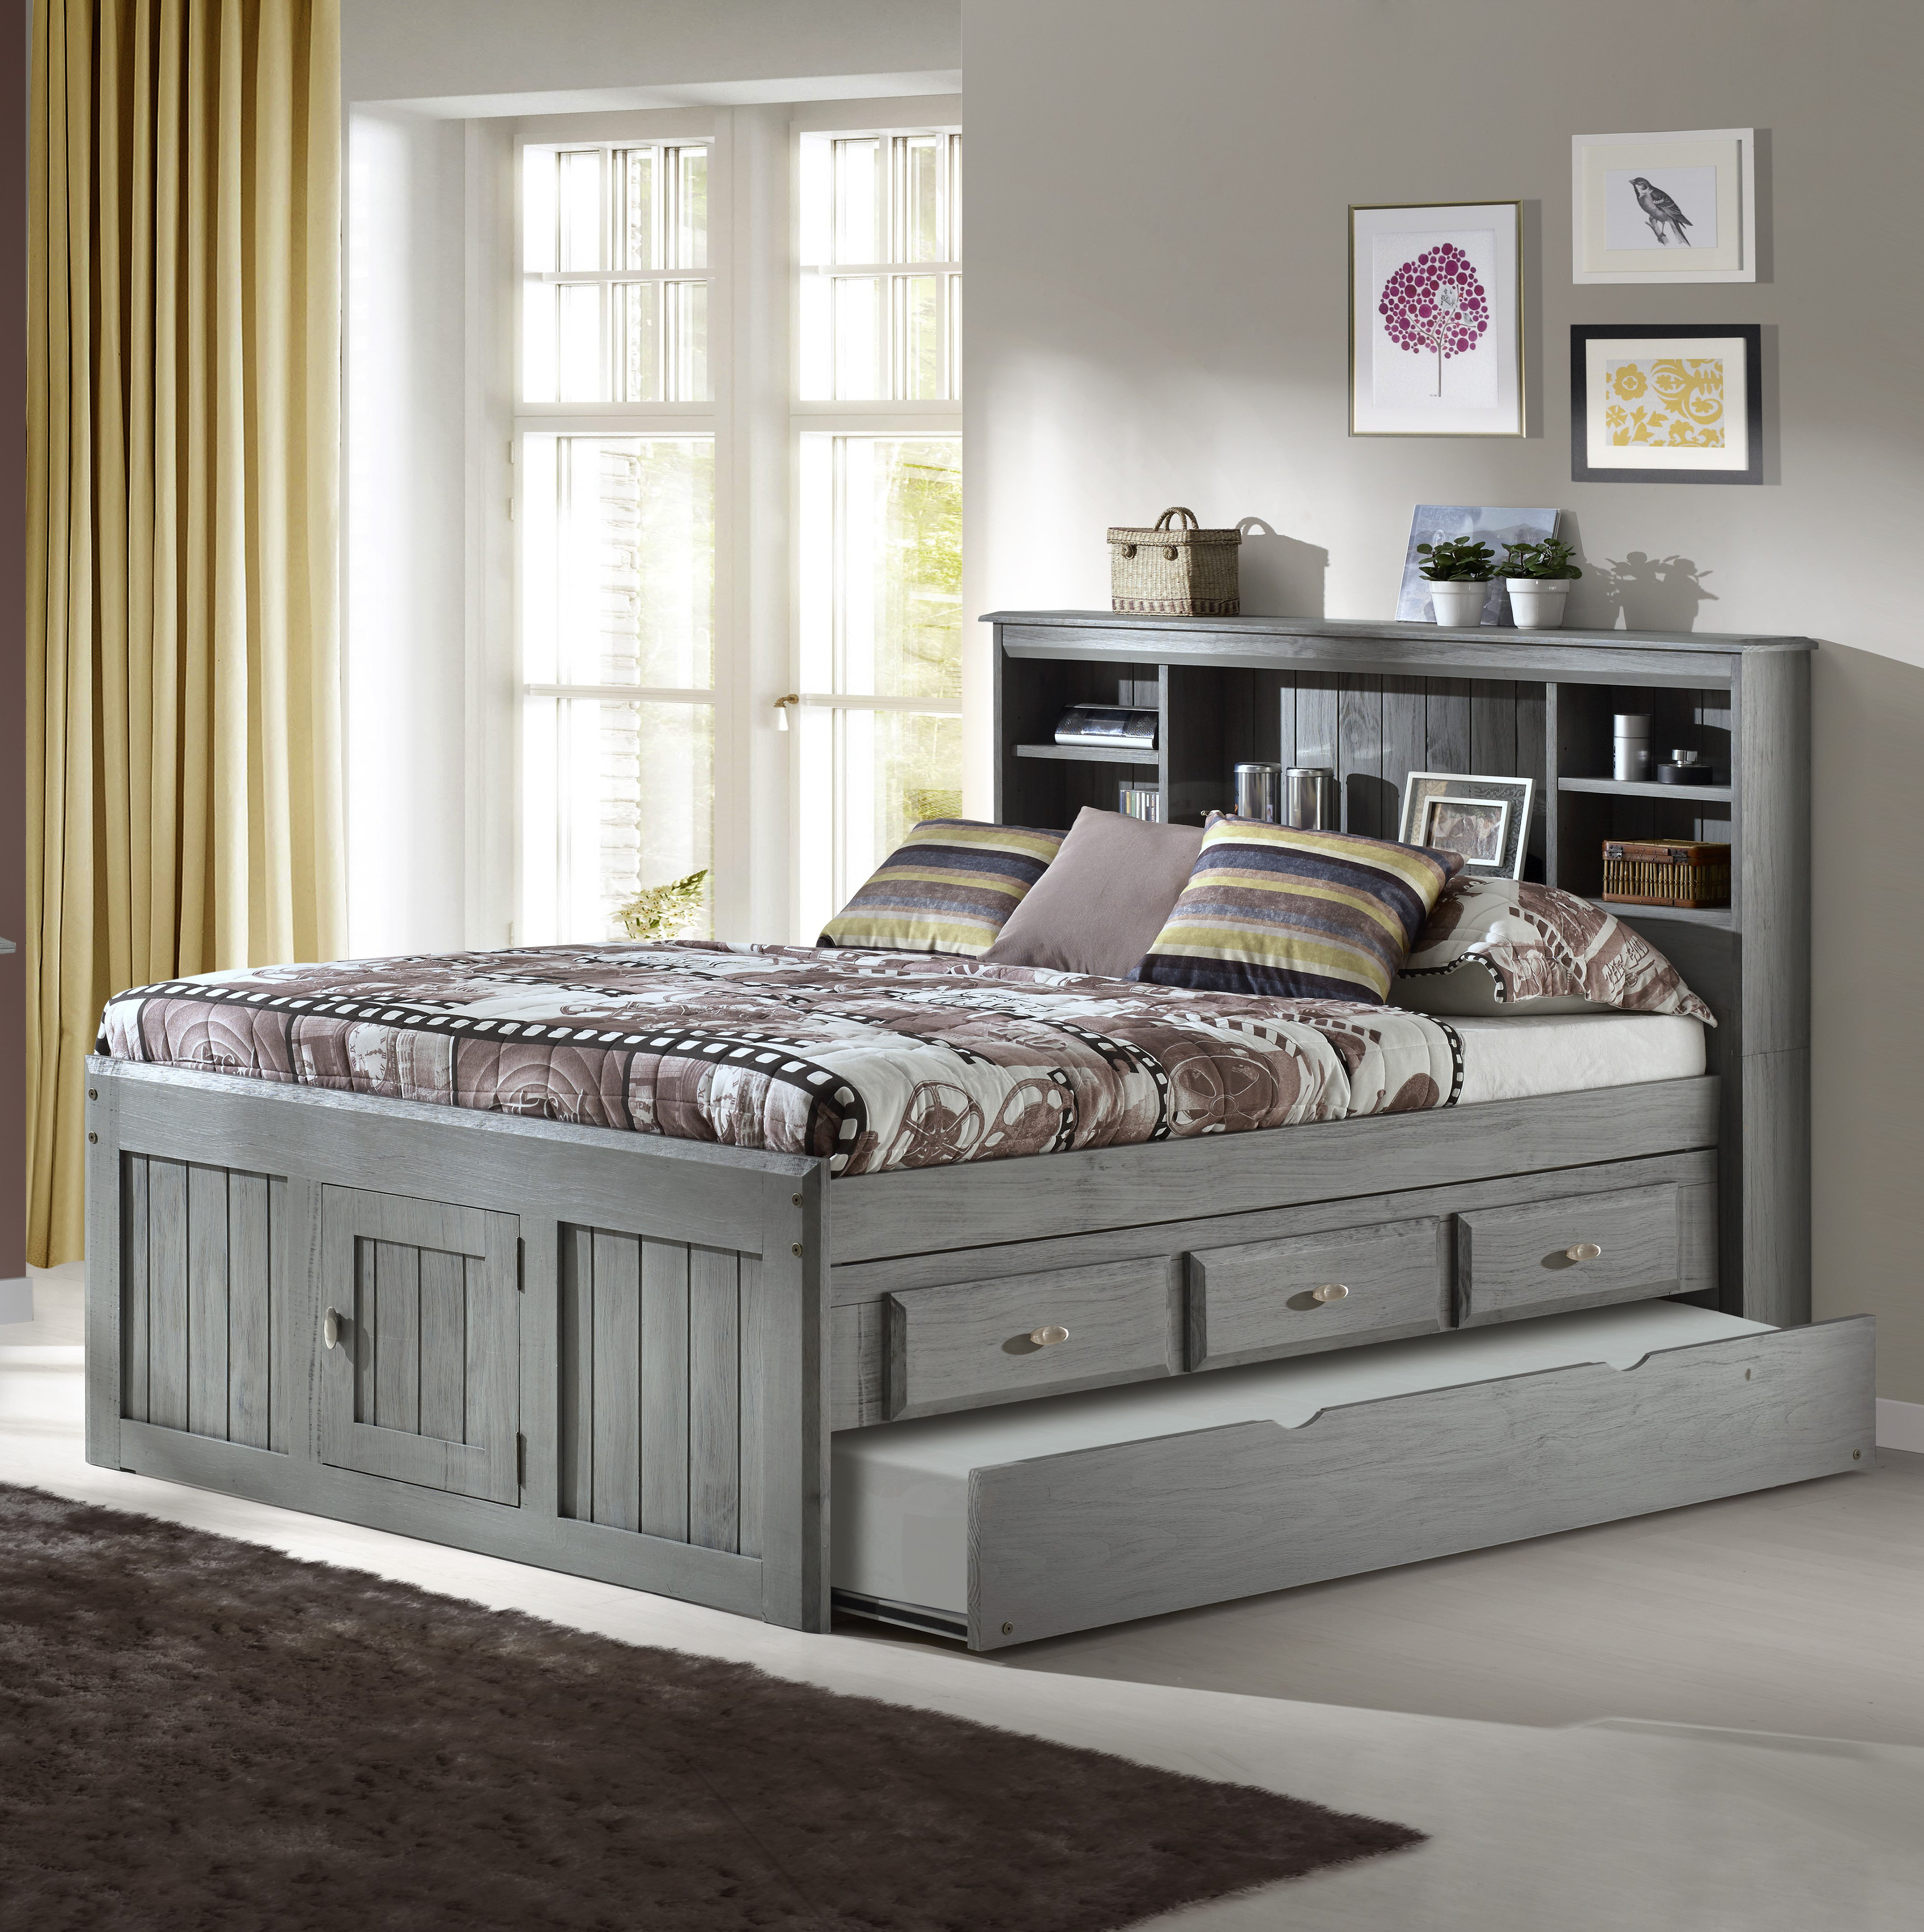 kids bed with drawers